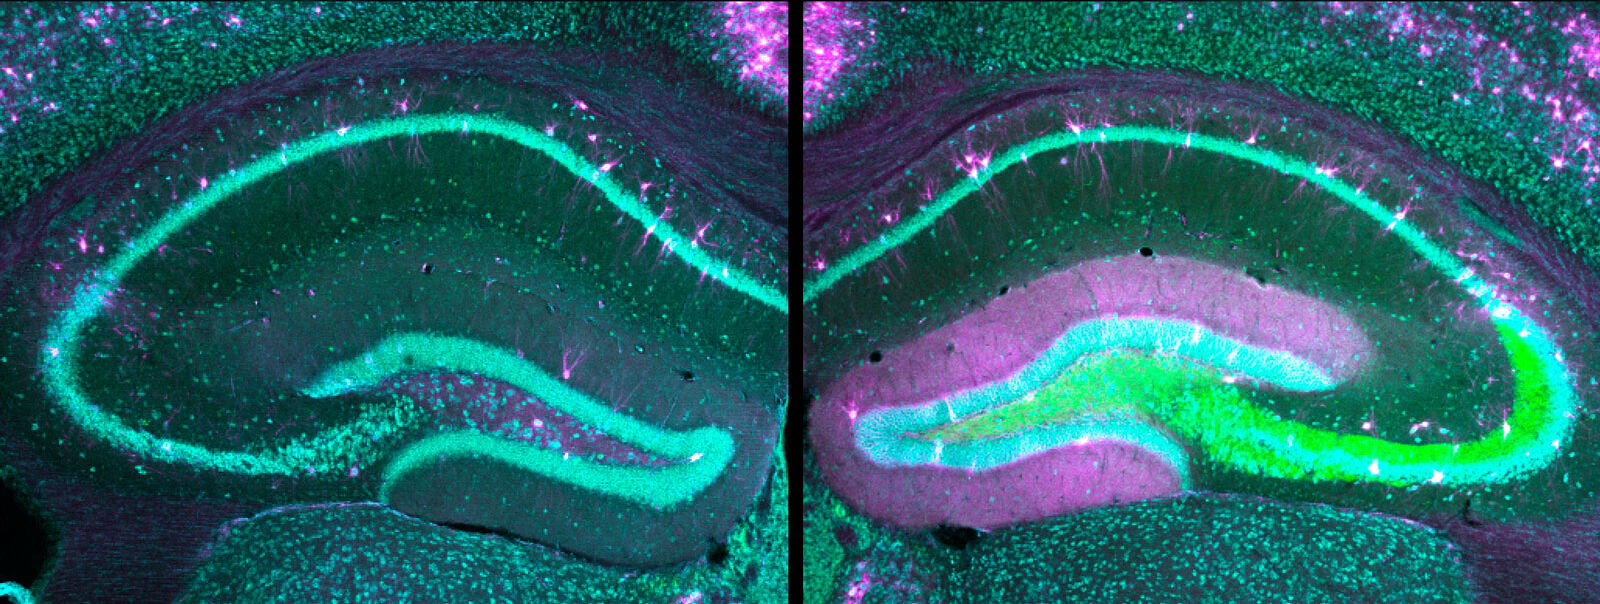 The image shows brain slices through the memory region (hippocampus) of a healthy mouse (left), and an epileptic mouse with HCN1 mutation (right).